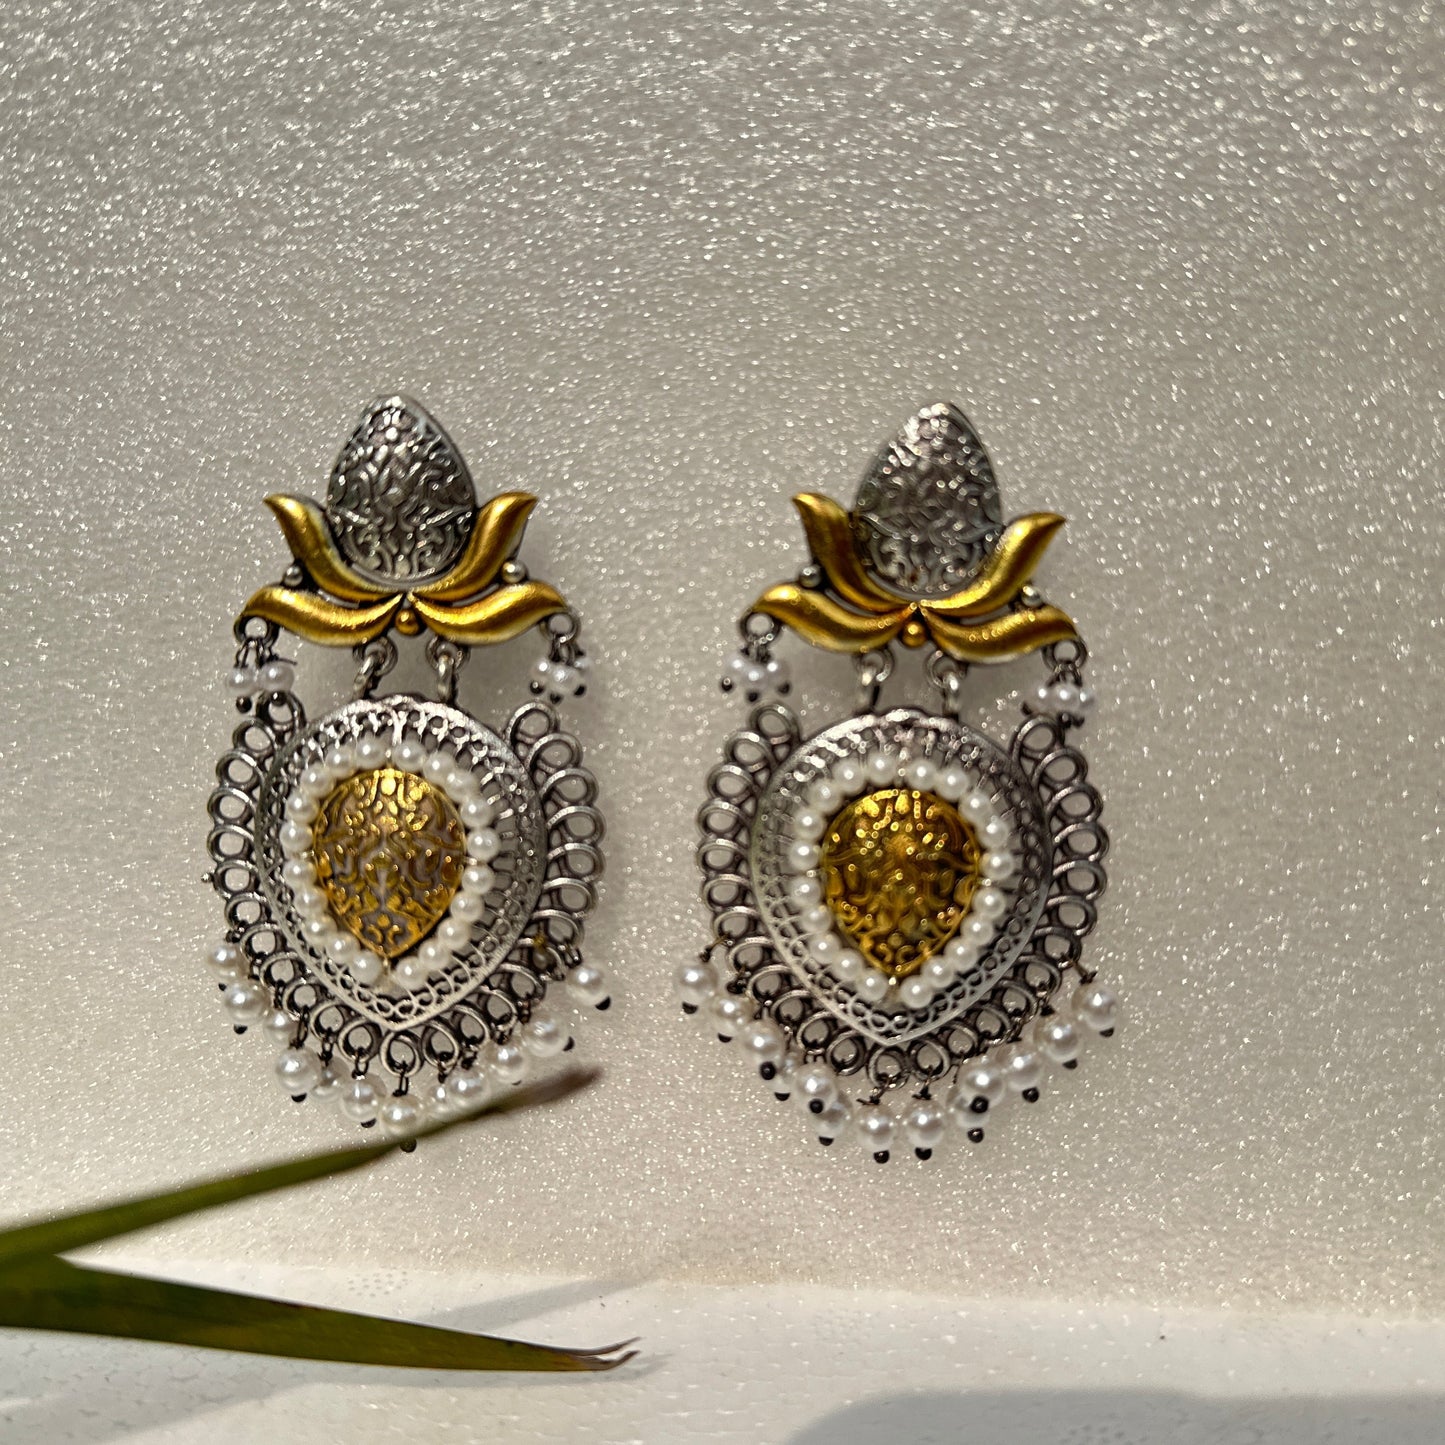 Elegance in Harmony Gold and Silver Earrings